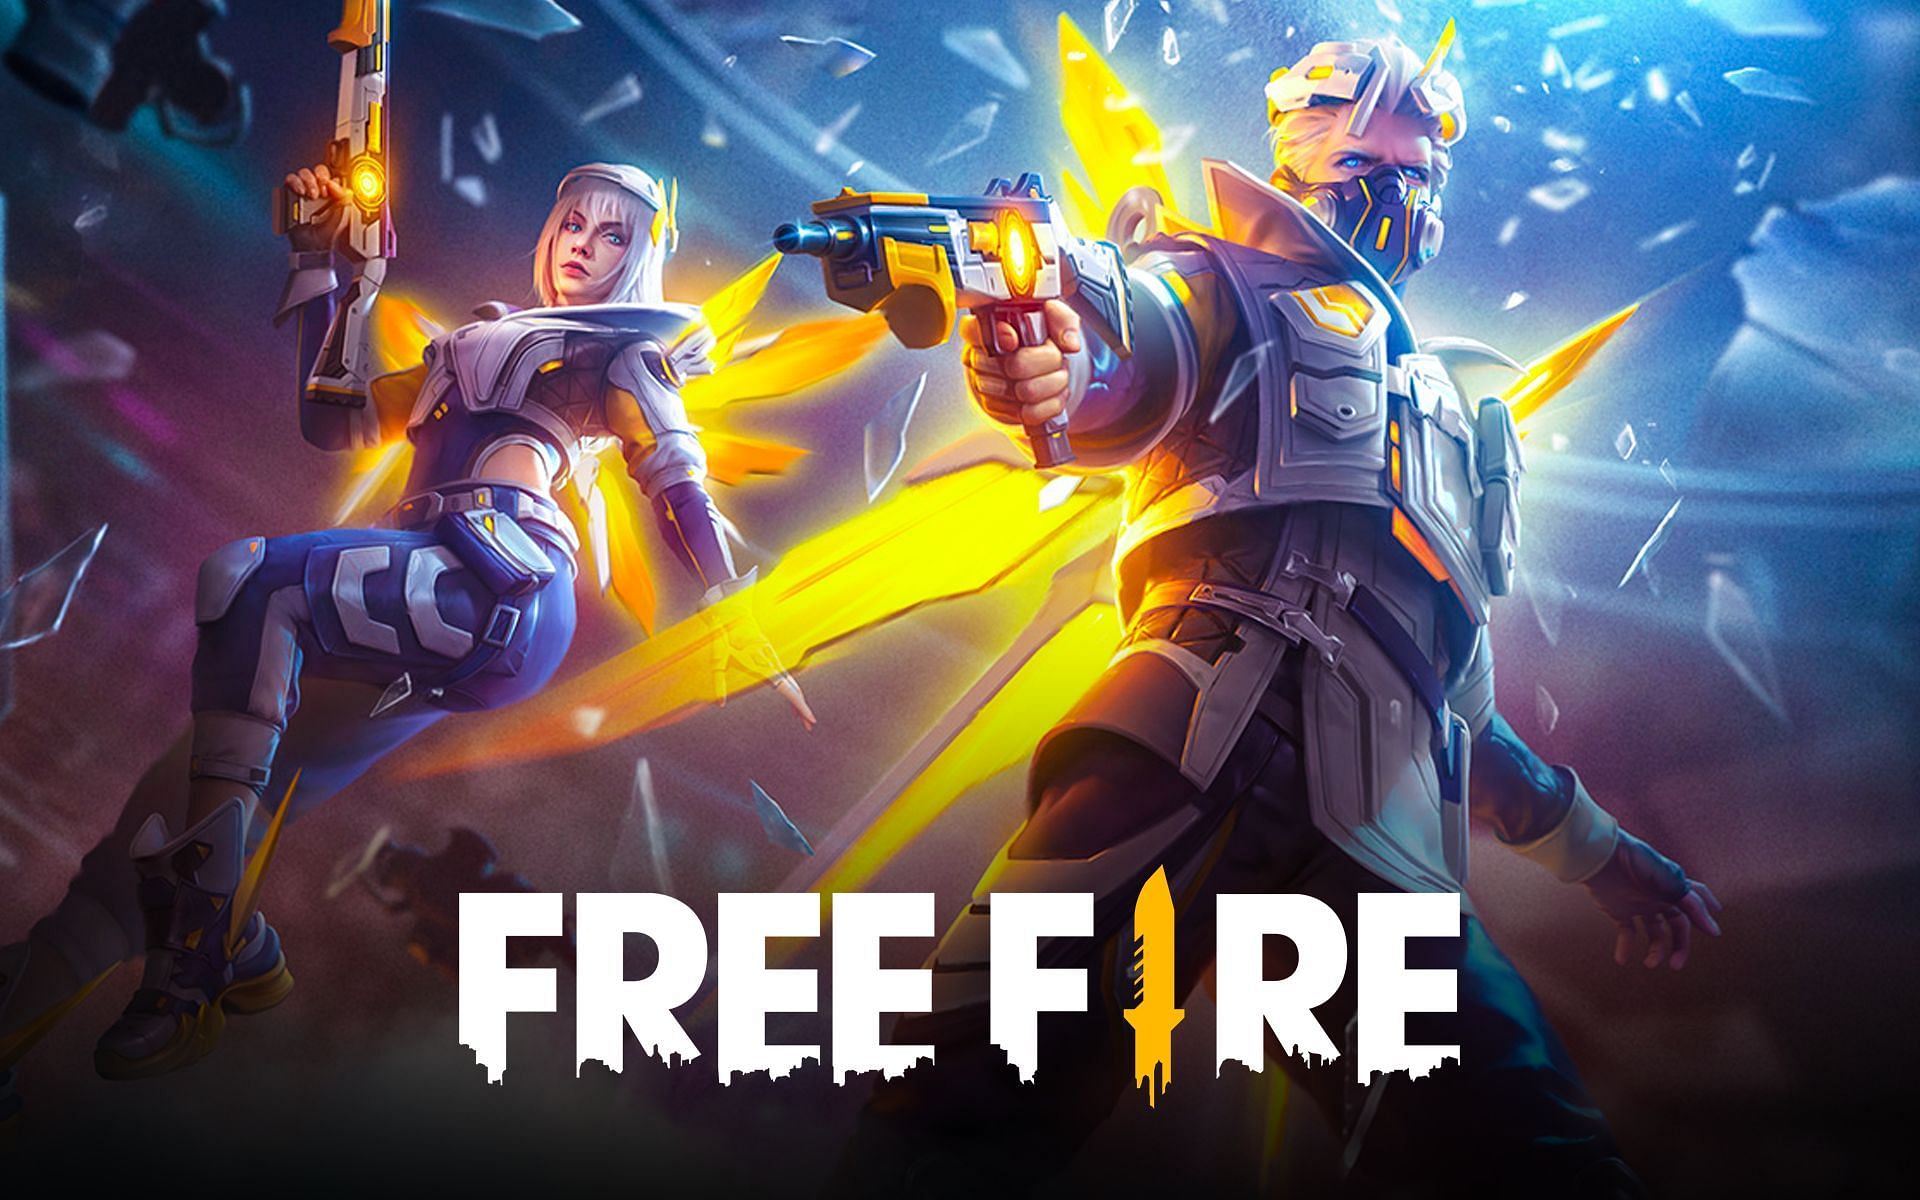 Coolest Free Fire skins with animated visual effects (Image via Sportskeeda)